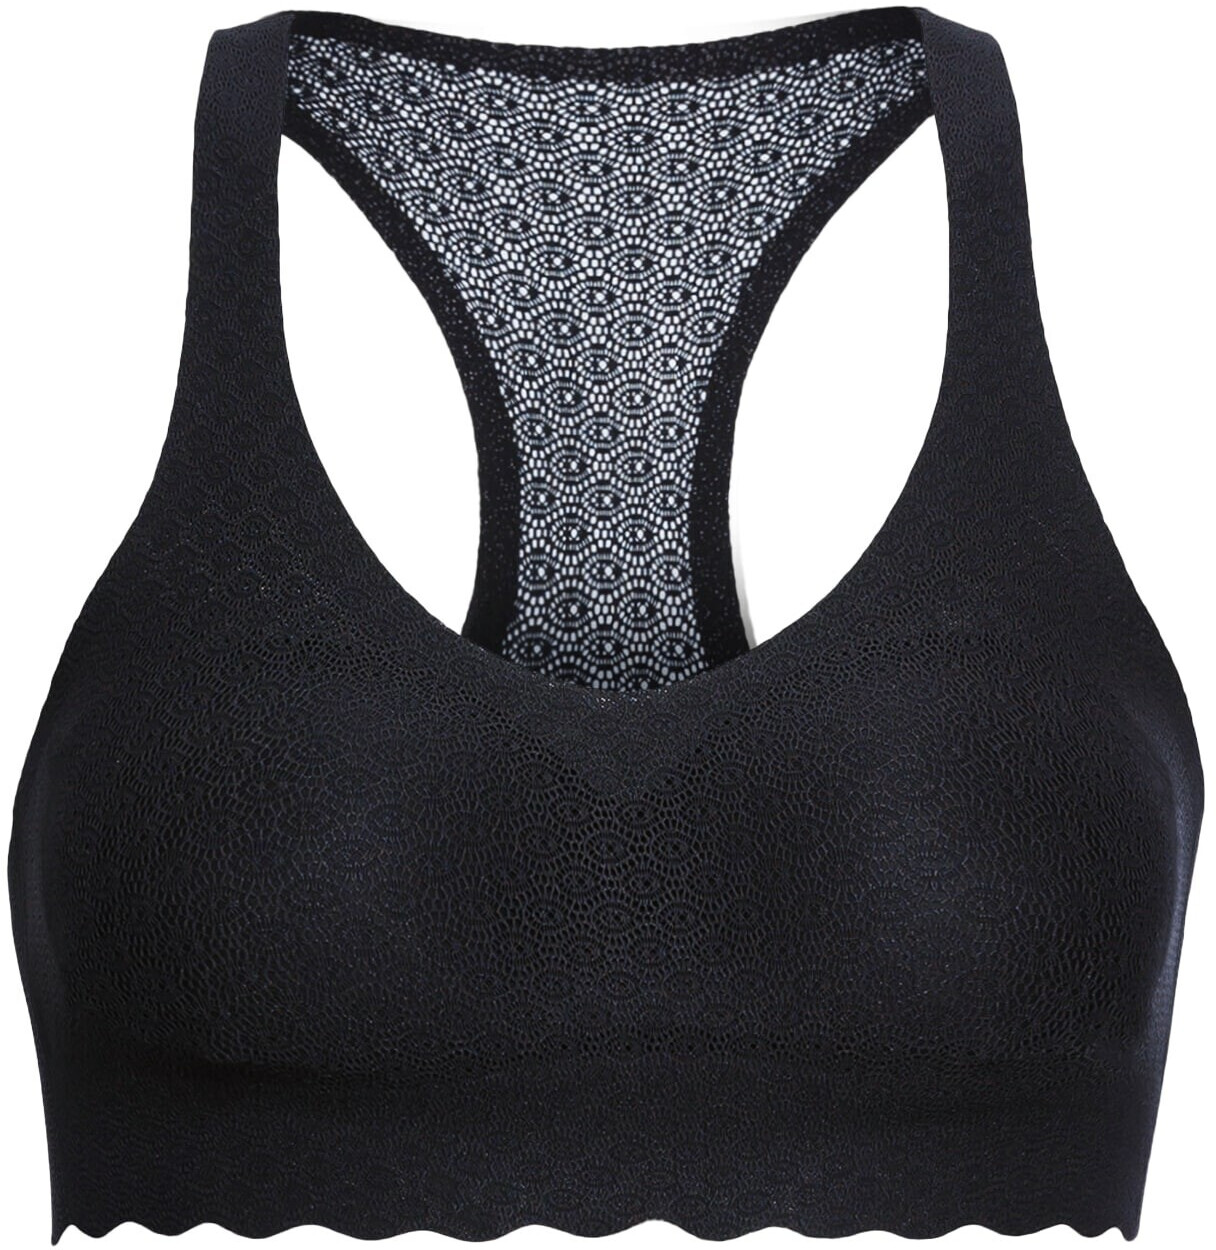 Buy Sloggi Zero Feel Lace Top (10201958) from £12.98 (Today) – Best Deals  on